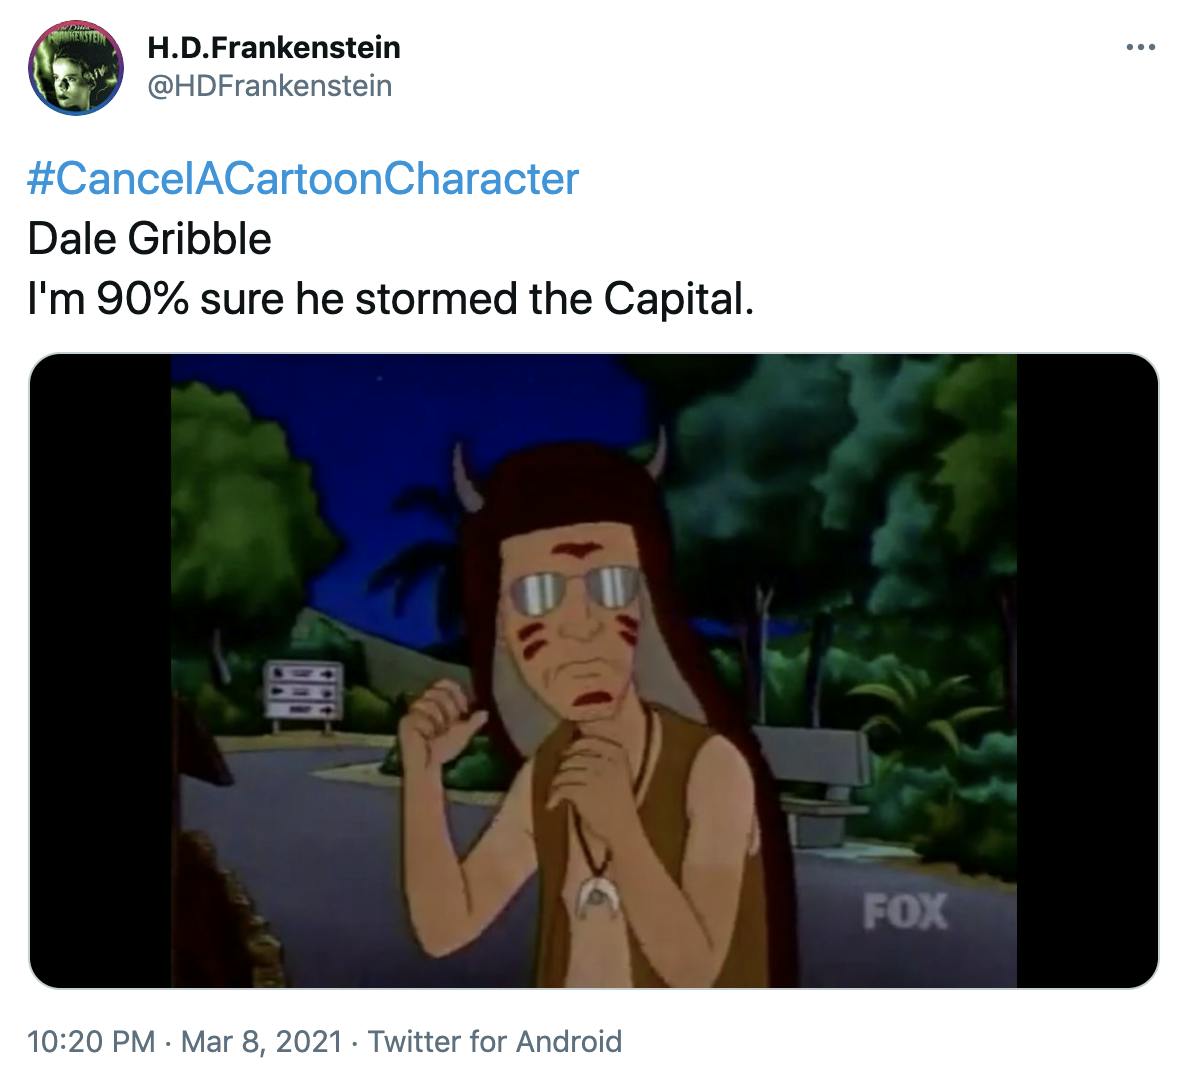 '#CancelACartoonCharacter Dale Gribble I'm 90% sure he stormed the Capital.: Dale Gribble wearing a buffalo skin hat with horns, a bare chest with a crescent moon bone necklace and red 'war paint' over his face, looking weirdly like the Q Anon Shaman